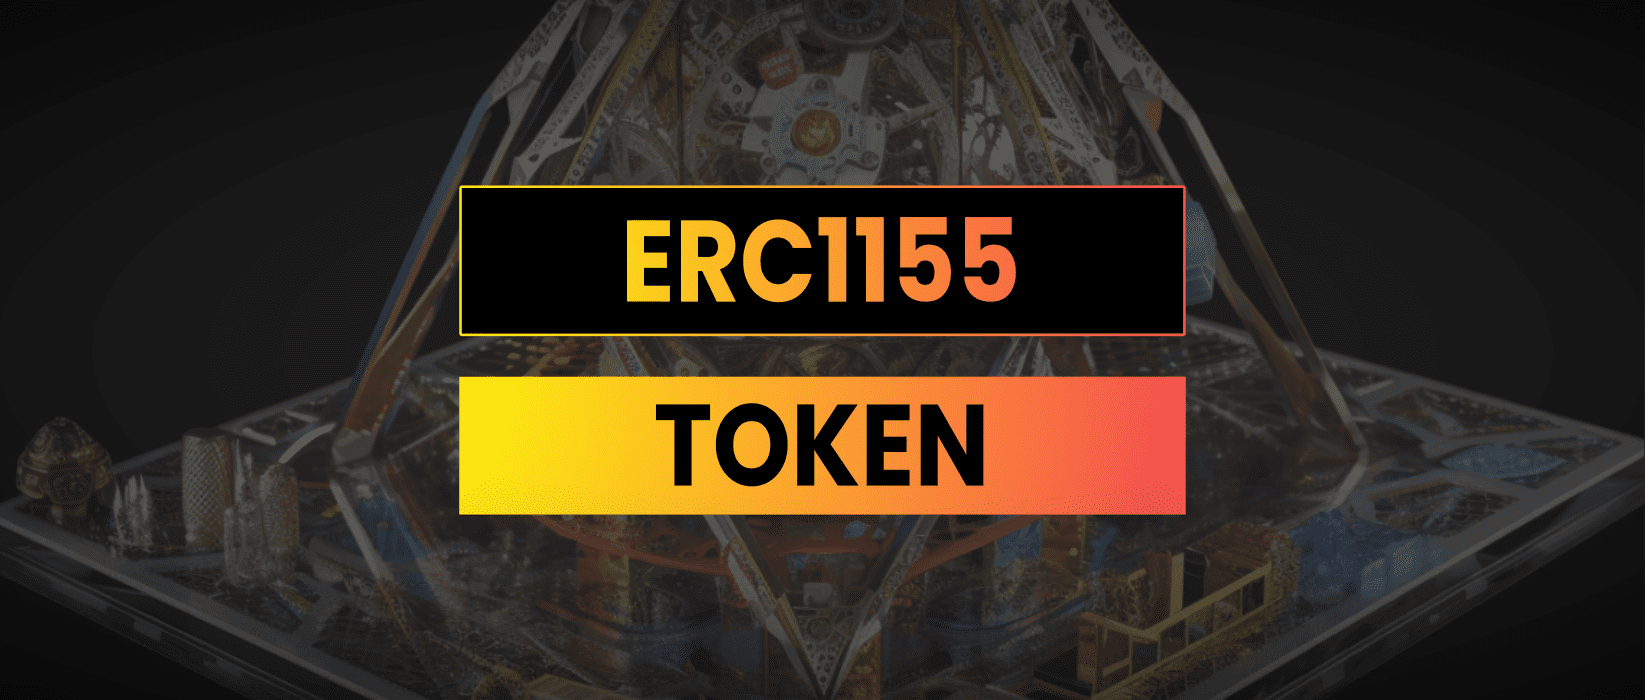 ERC1155 Token Contract | Solidity Tips & Examples